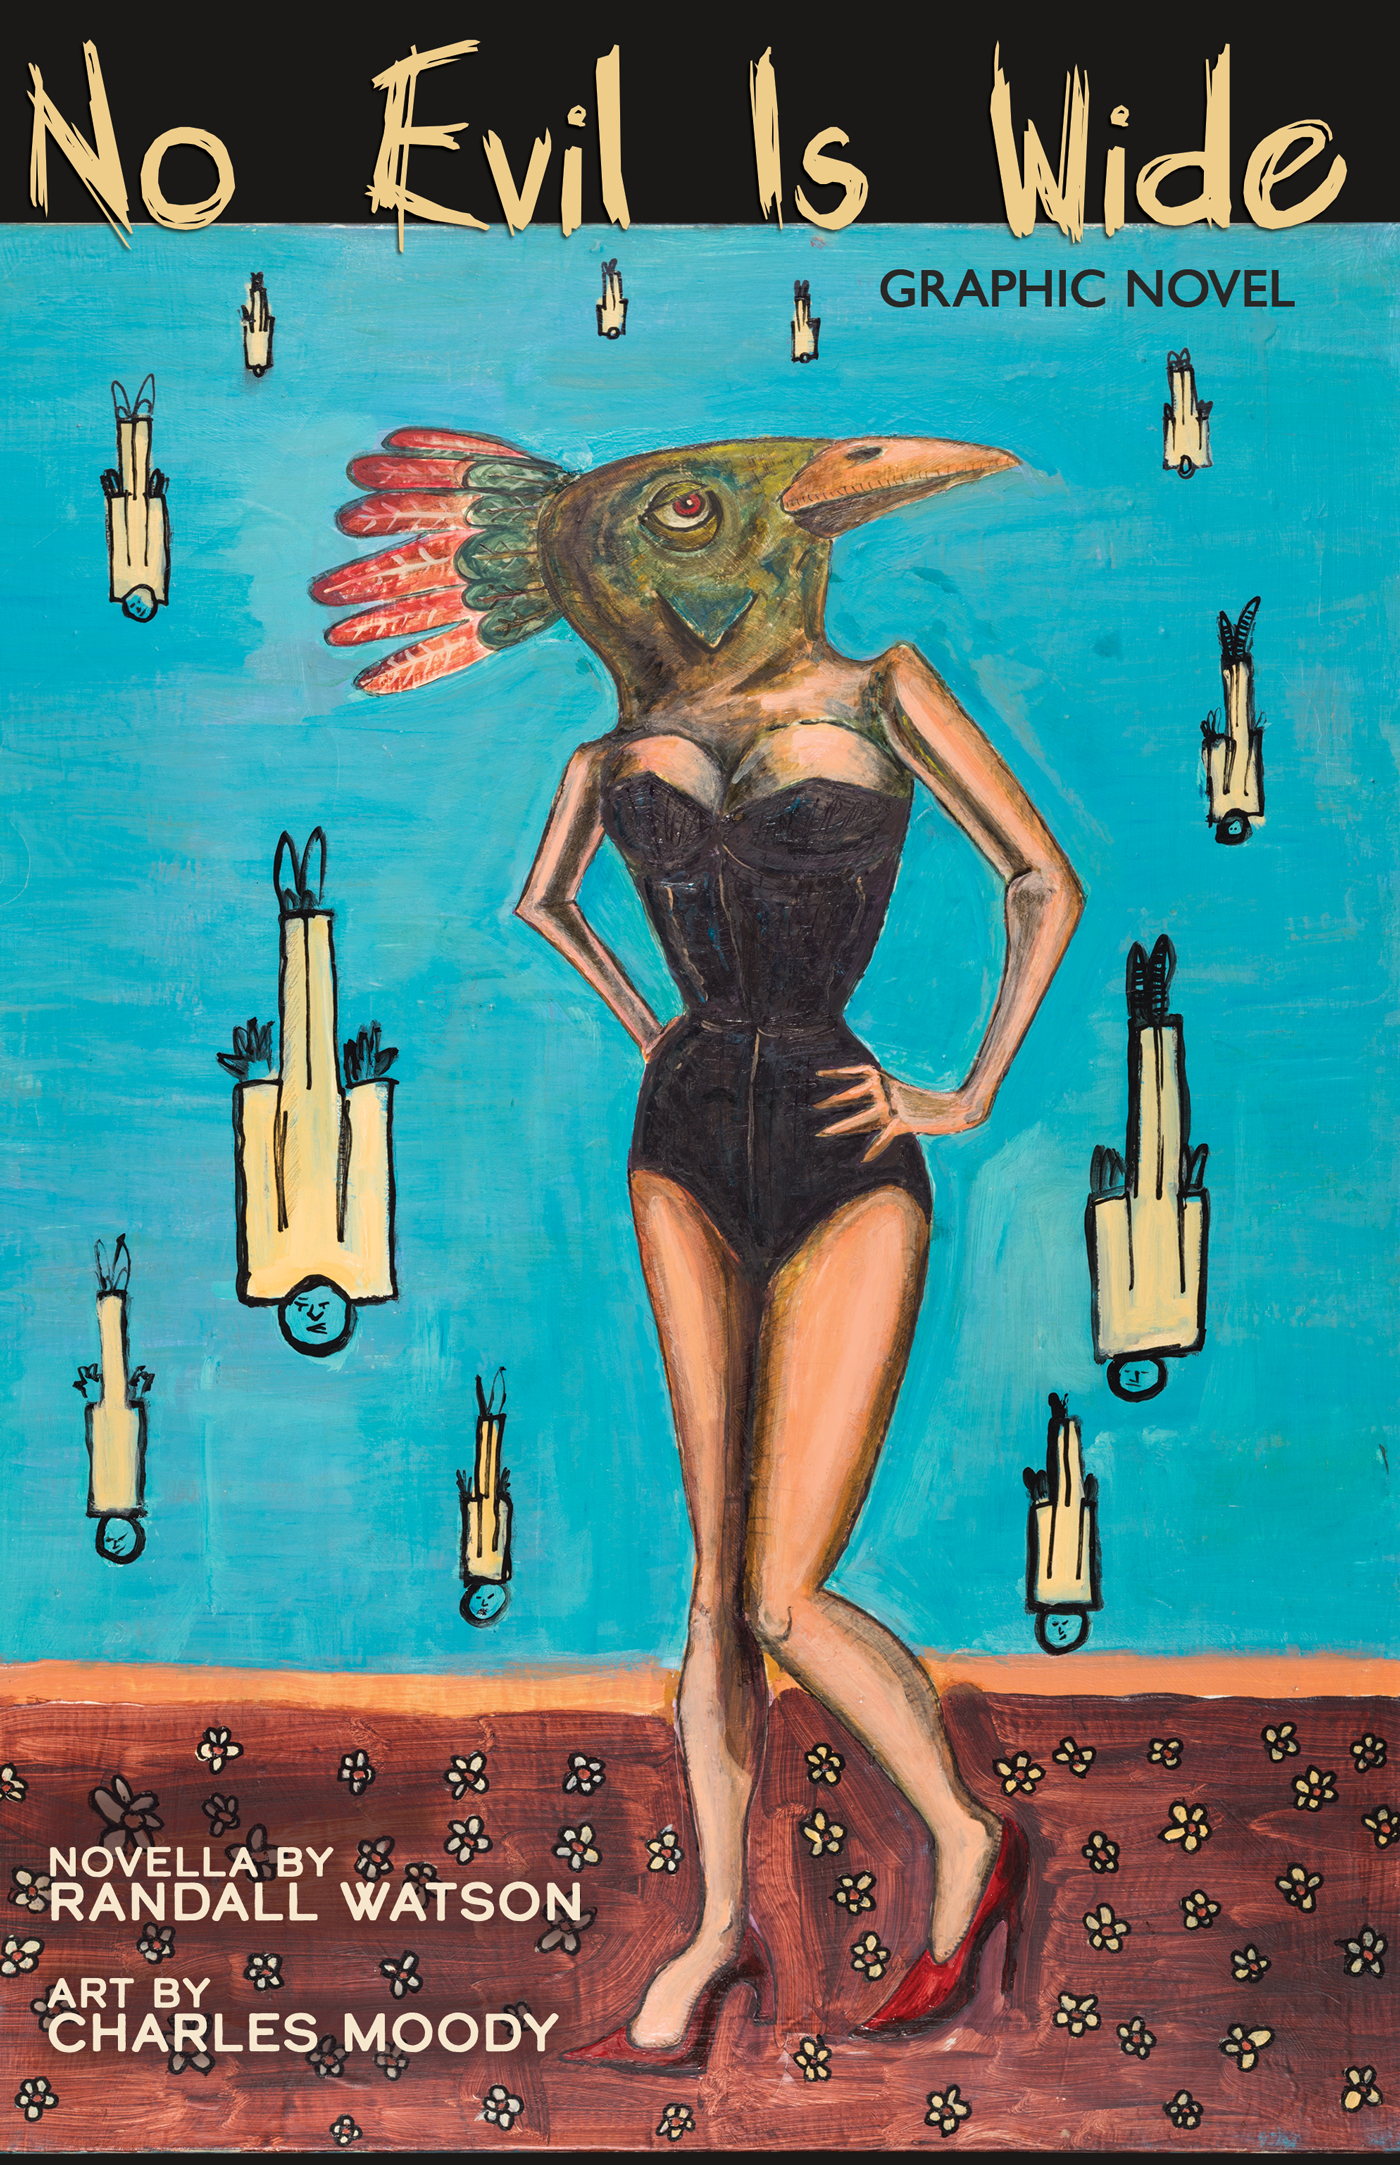 No Evil is Wide Graphic Novel novella by Randall Watson, art by Charles Moody. Cover image shows a girl in a bare-shouldered black swimsuit or leotard, red stilettoes, and a bird's head mask. The background behind her is turquoise blue, and men in cream colored suits are falling from the sky at her feet.